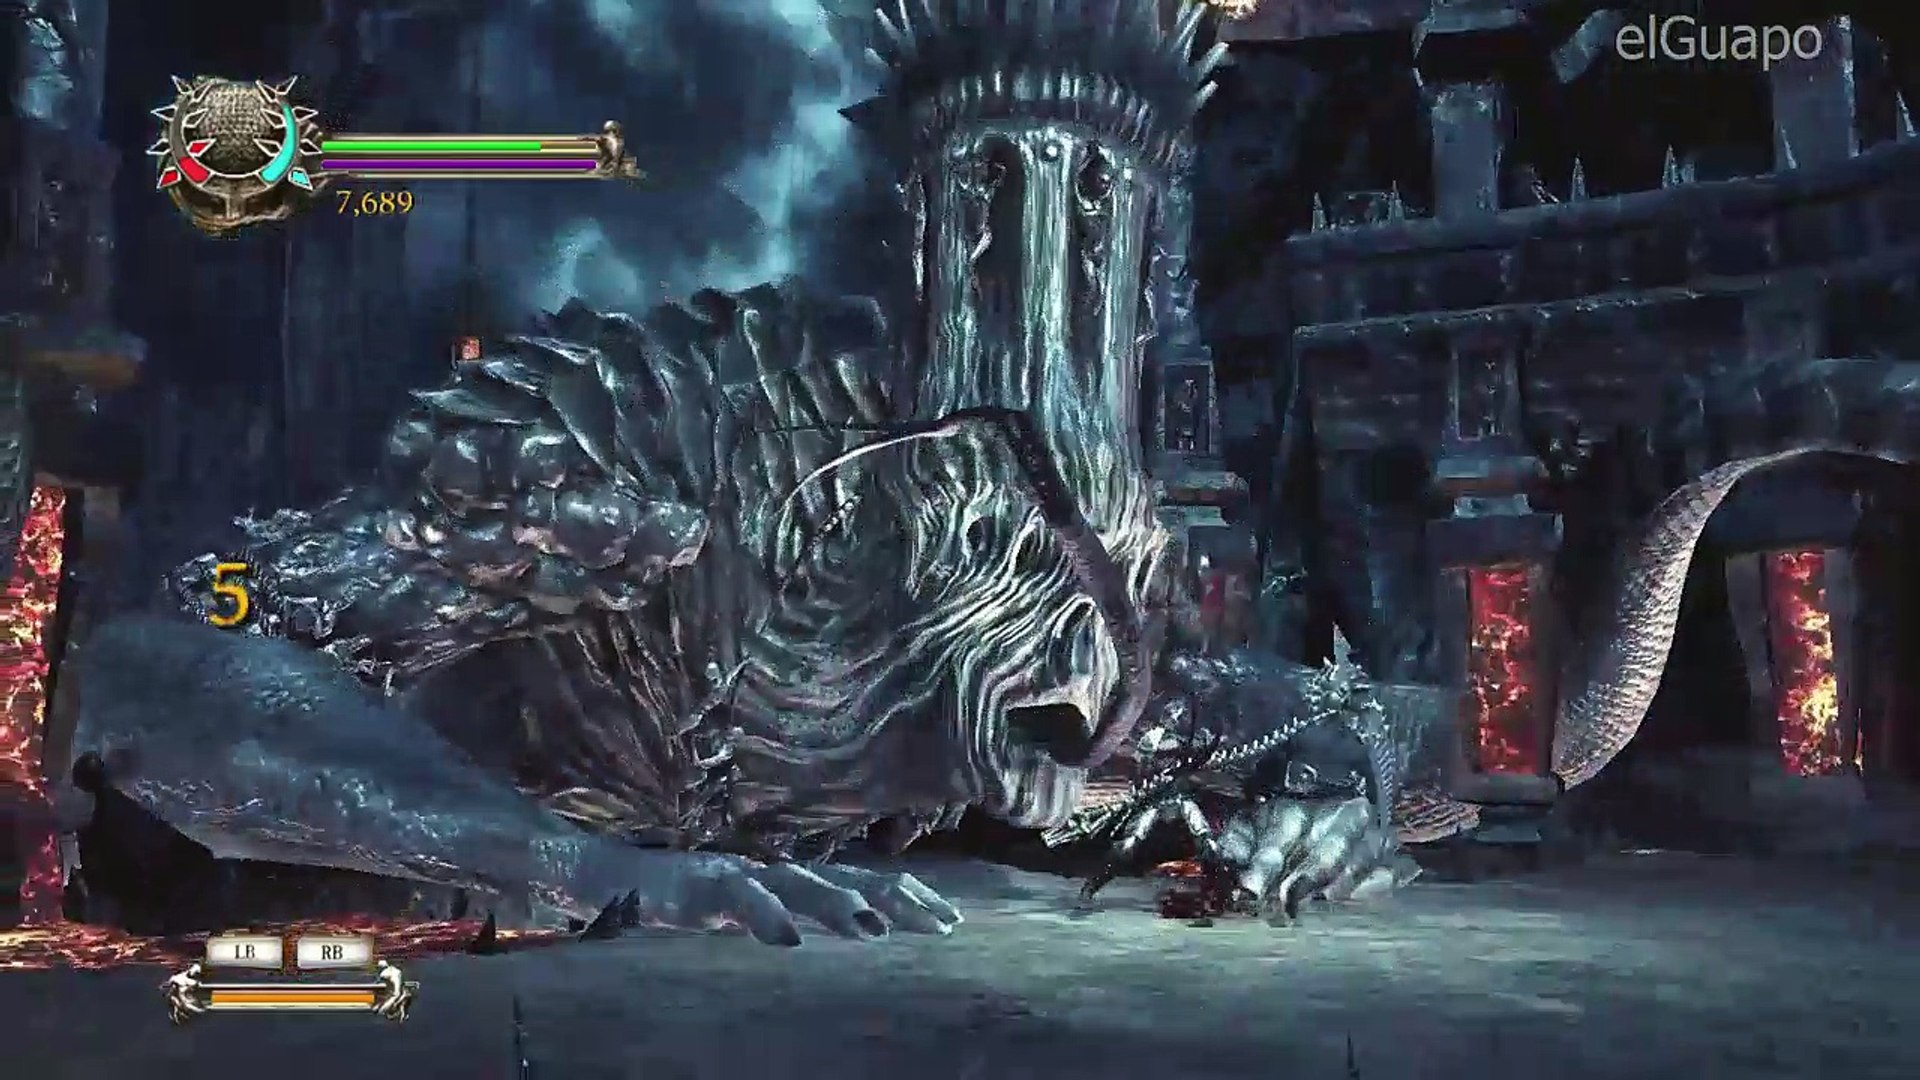 Gaming preview: Dante's Inferno trailer - Video - CNET